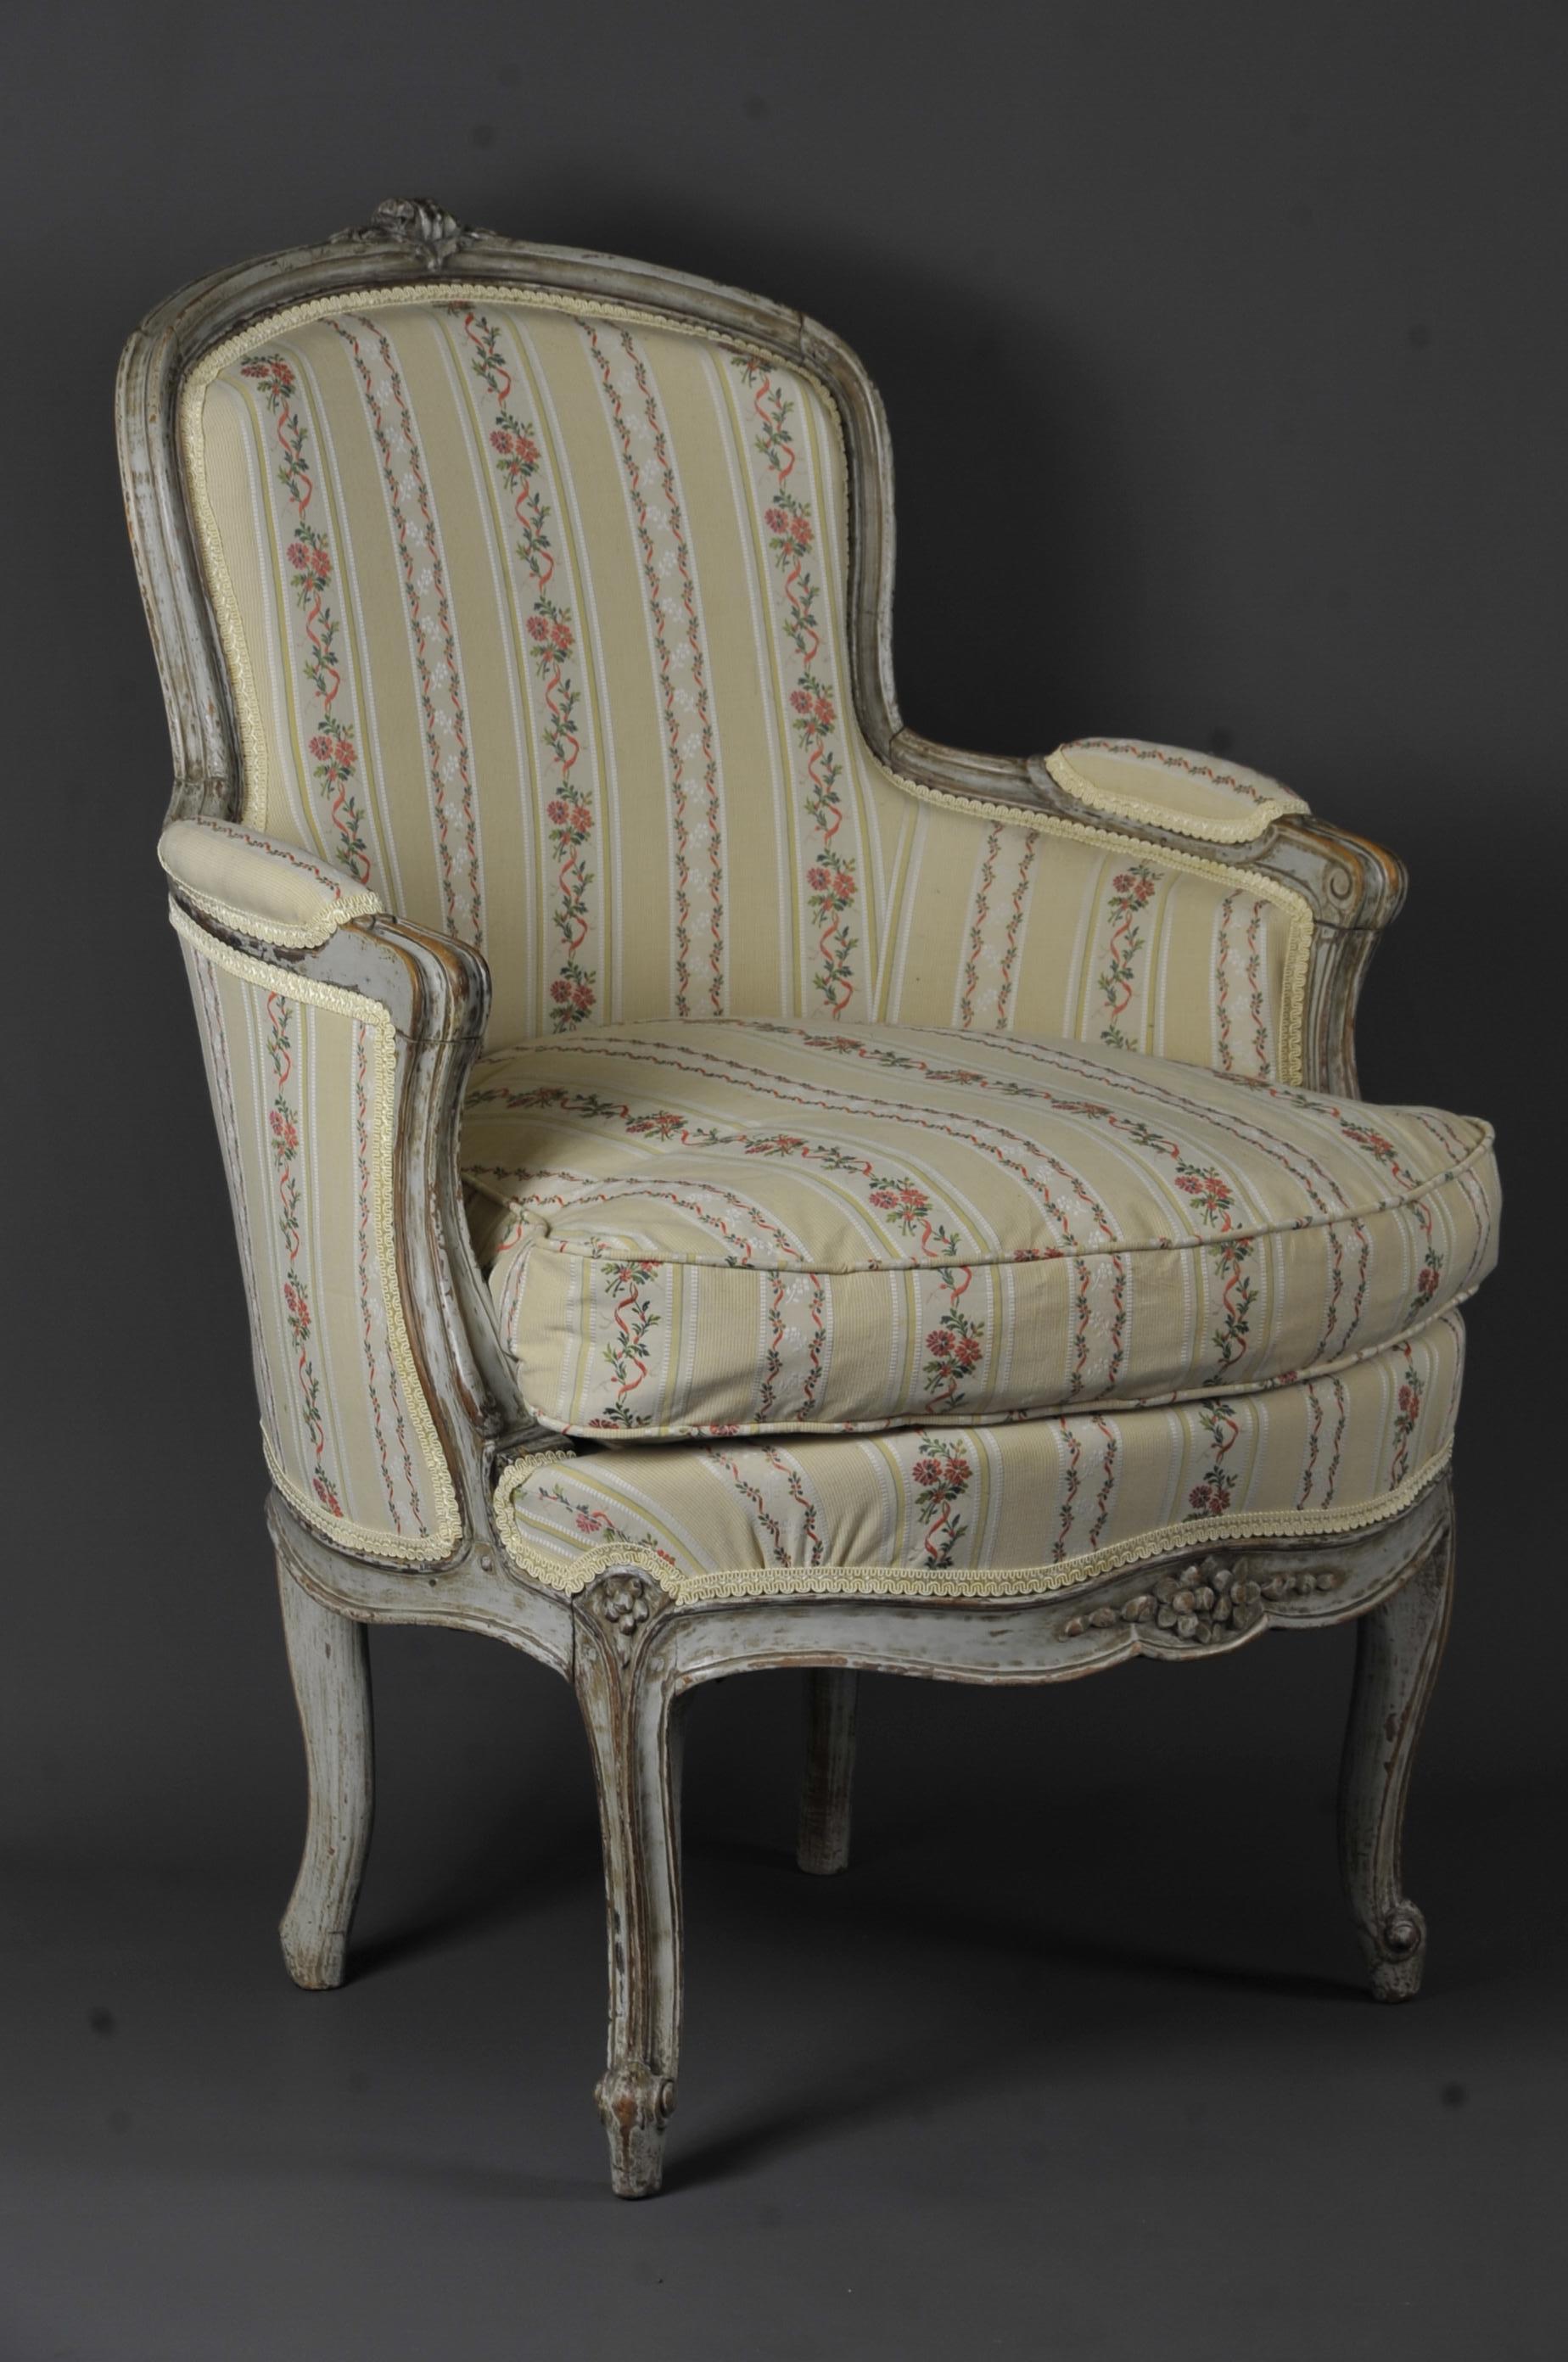 Very elegant transition armchair in gray lacquered and carved wood decorated with flowers.

Parisian work from the 18th century, end of the Louis XV period, beginning of the Transition period.


Very good condition: upholstery and seats